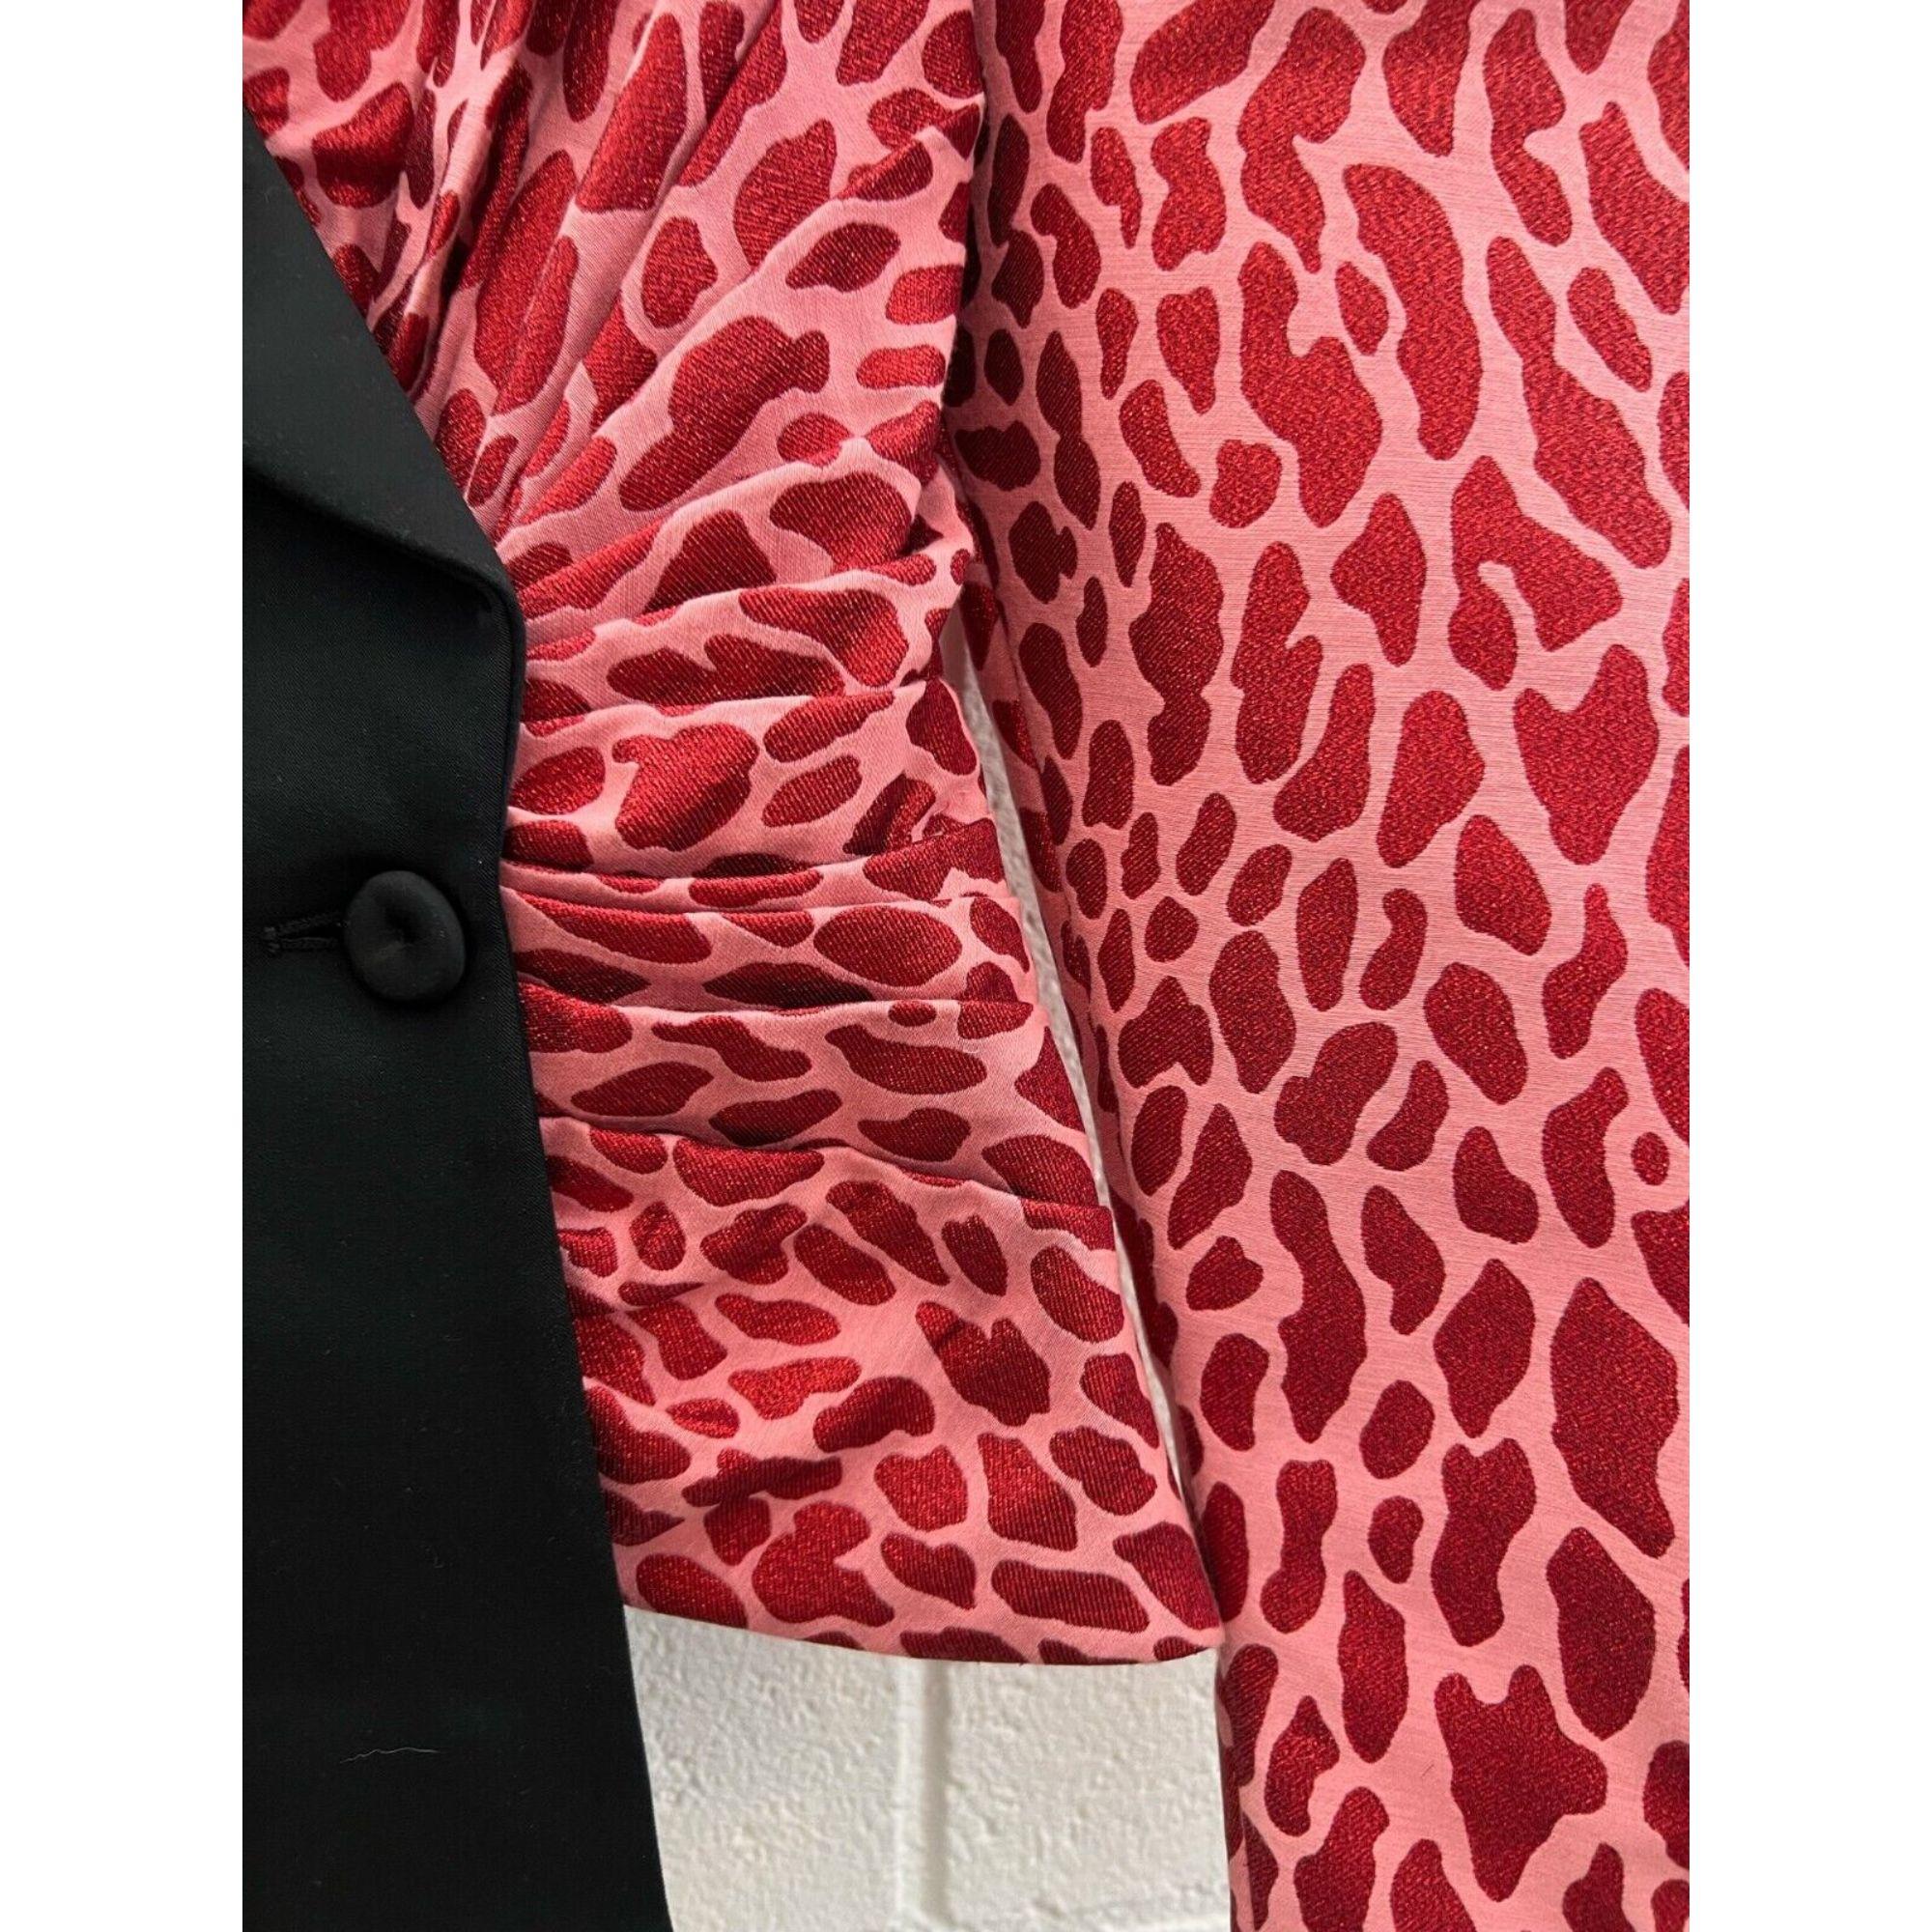 Women's AW21 Moschino Couture Jacket Half Black Half Pink Leopard Spots by Jeremy Scott For Sale